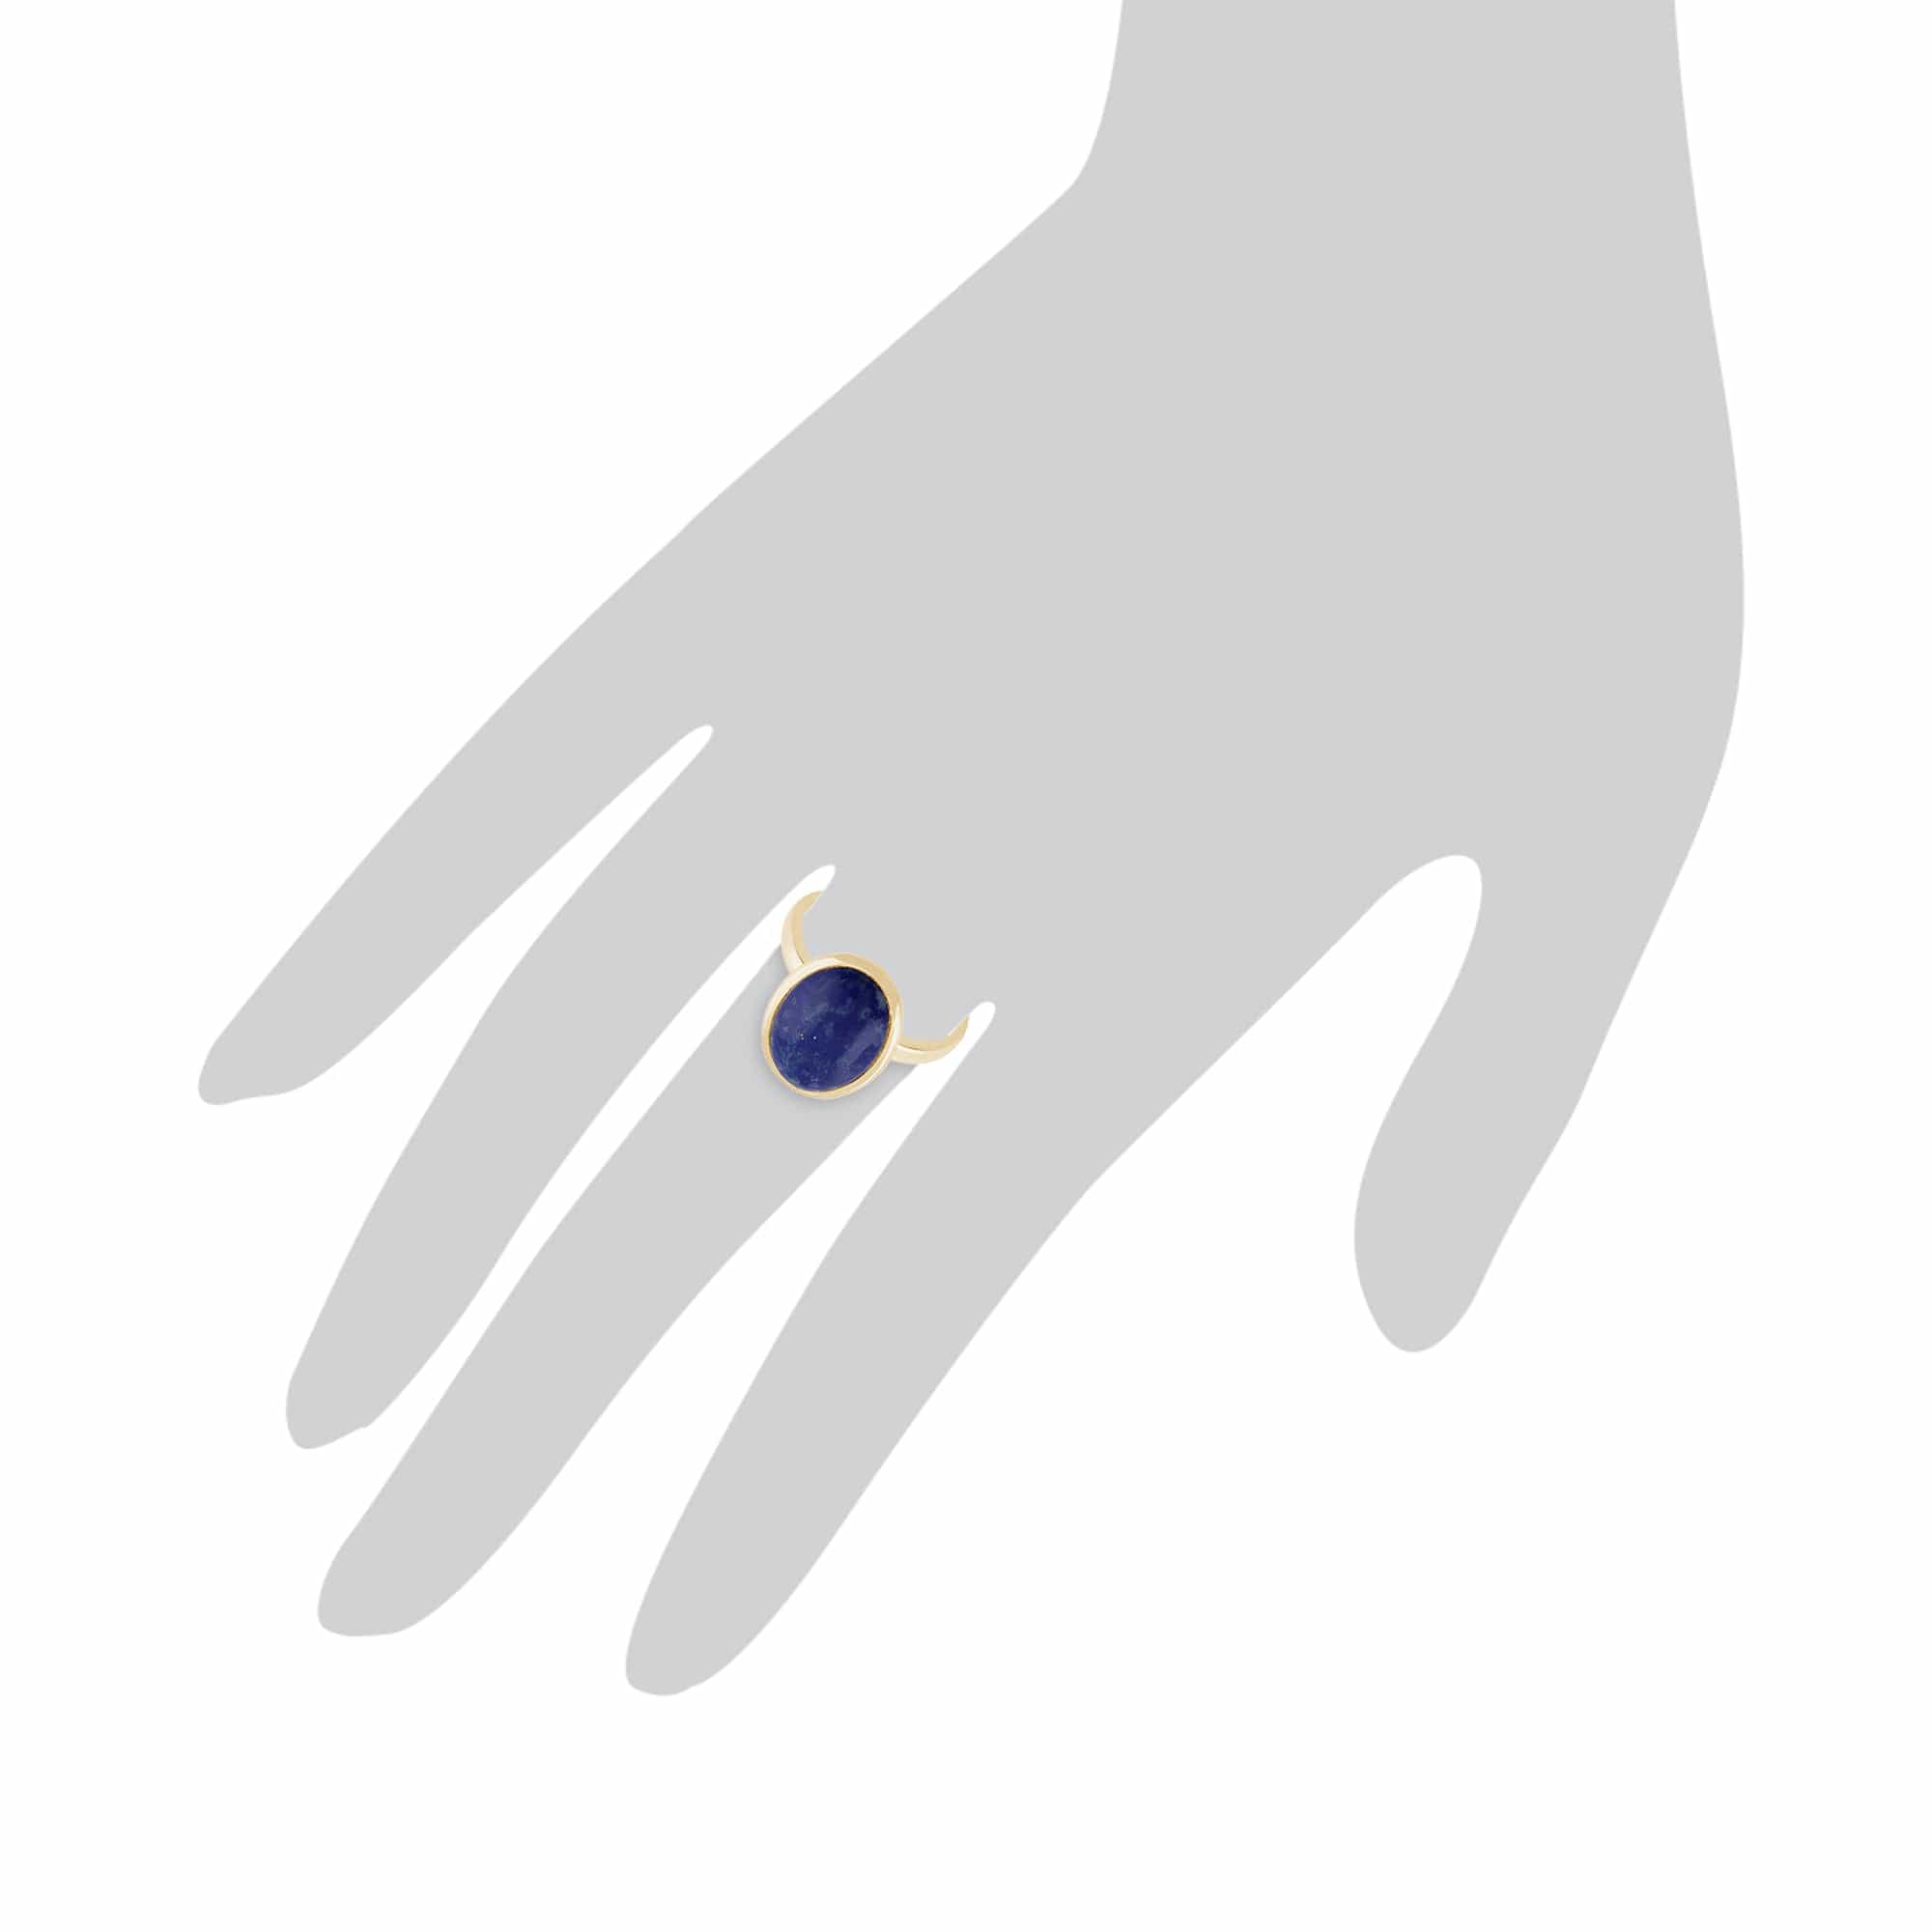 135R1250019 Statement Oval Lapis Lazuli Ring in 9ct Yellow Gold 4